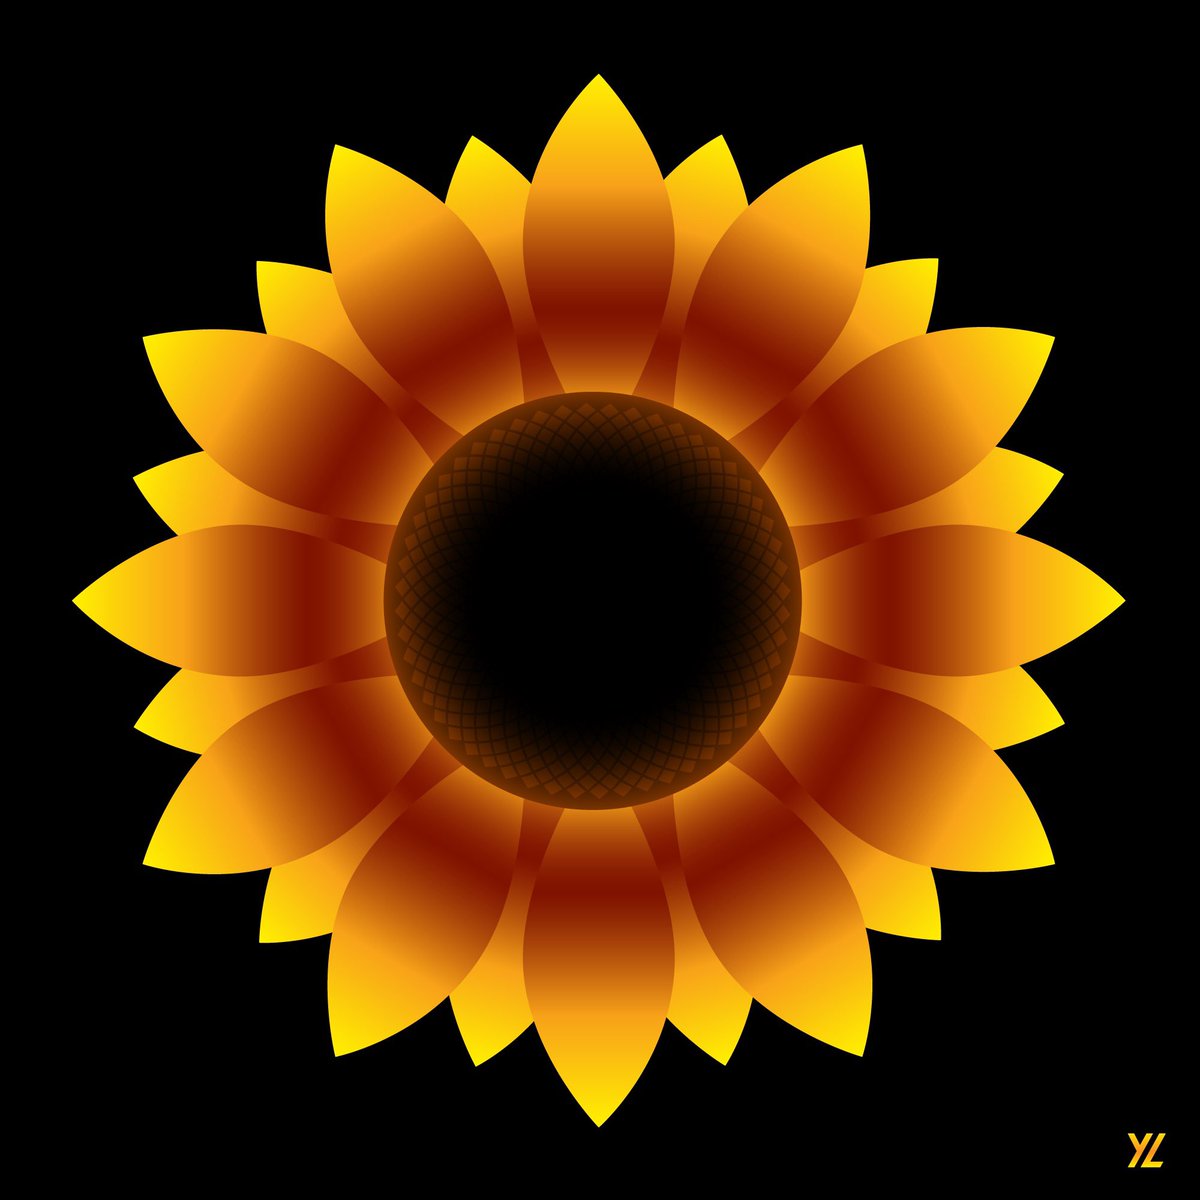 Have you ever seen the Solar Eclipse Helianthus annuus🌻? Its black center, surrounded by golden brown petals, mirrors the eclipse's magnificence on Earth. I made this artwork to commemorate today's Total Solar #Eclipse2024 —a rare alignment of sun ☀️ , moon 🌕 , and Earth 🌏.